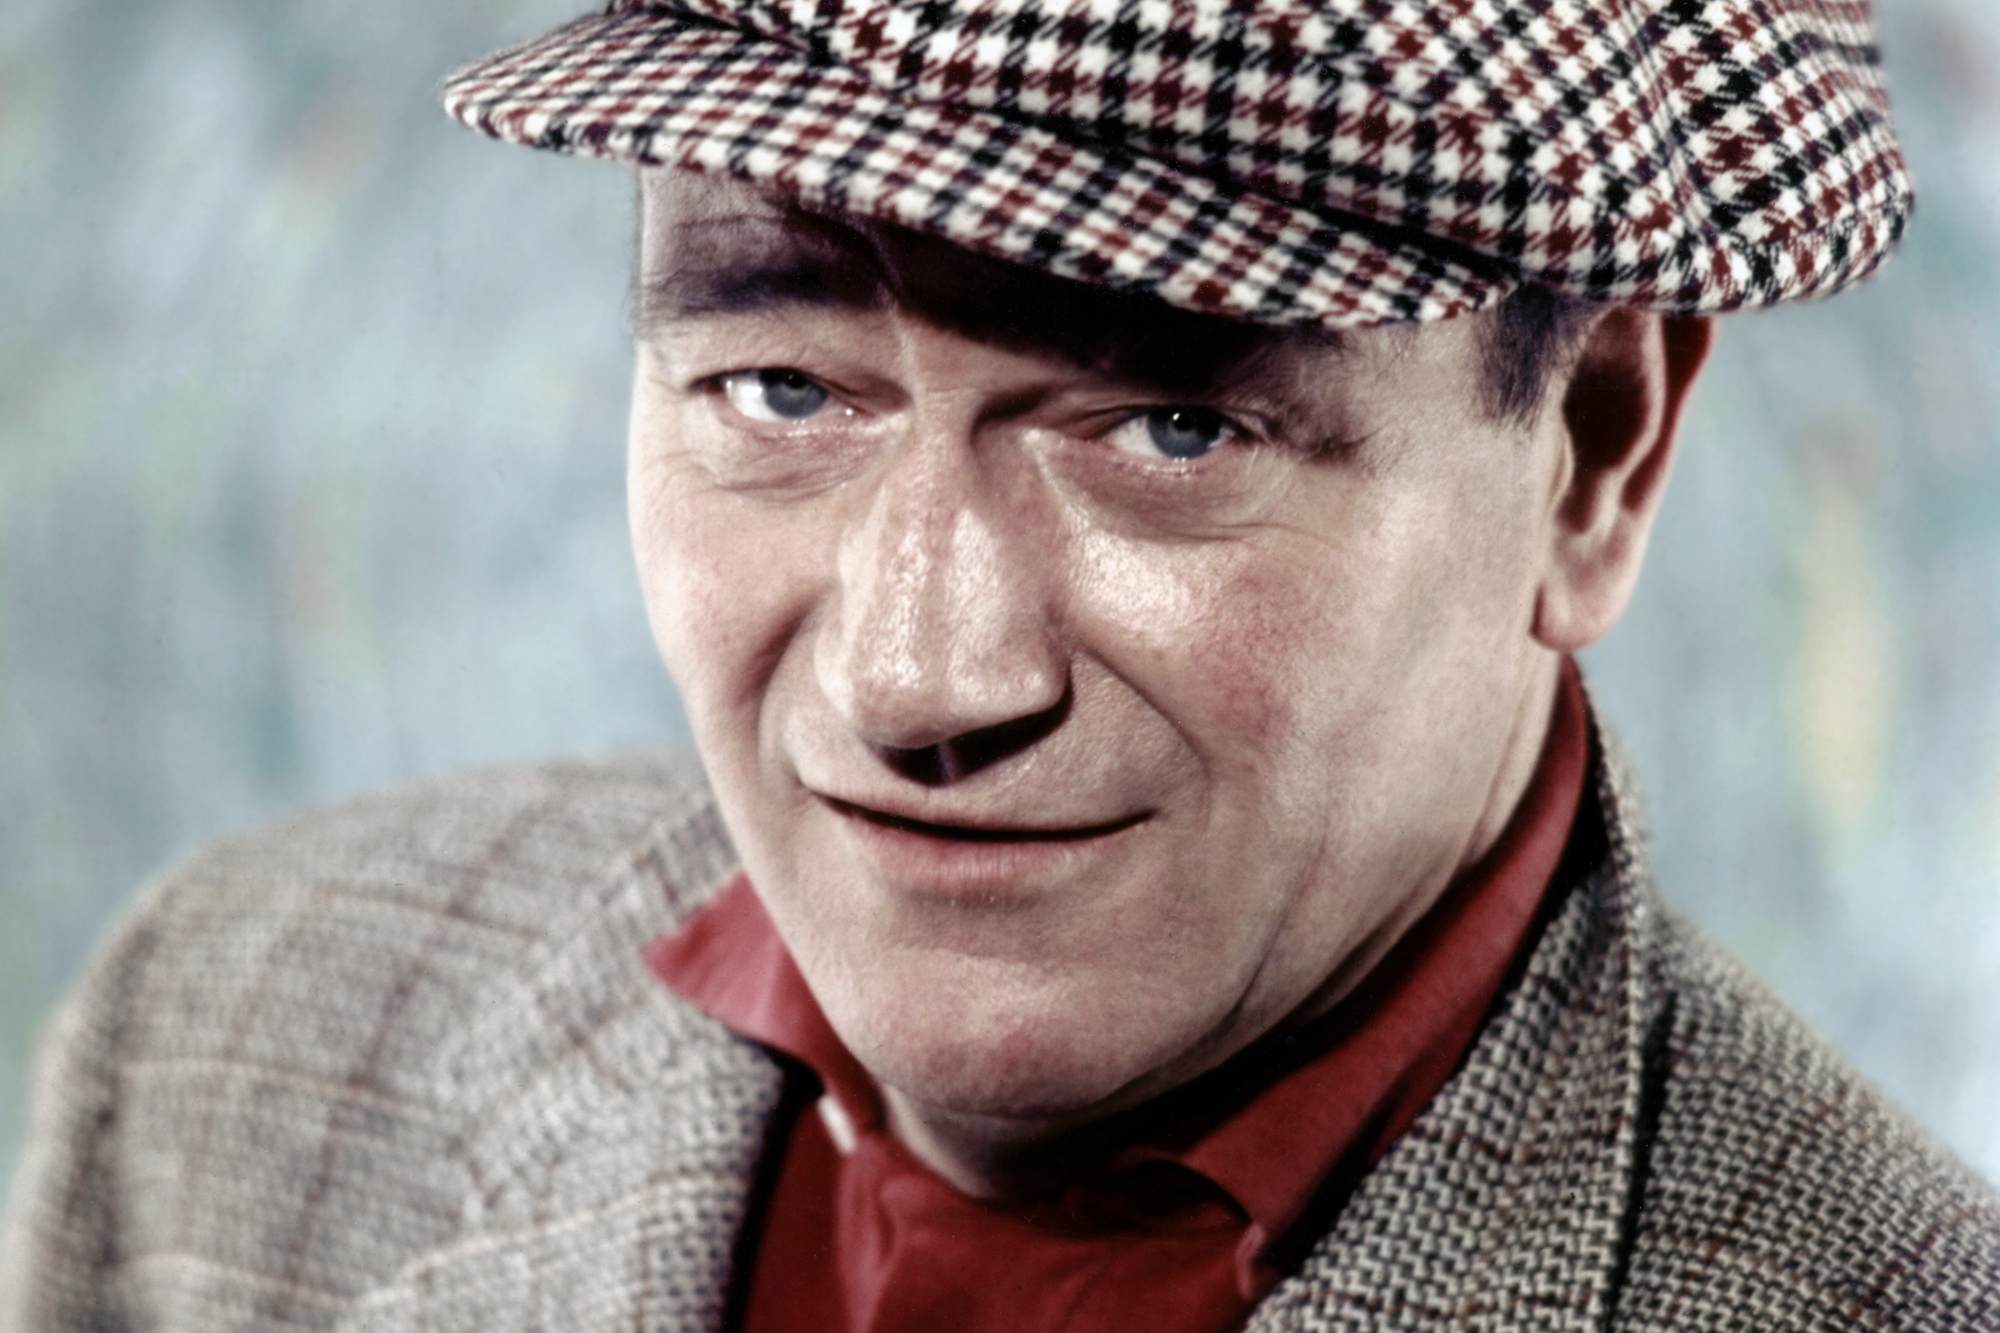 'The Quiet Man' John Wayne as Sean Thornton in a portrait wearing a hat and suit jacket.